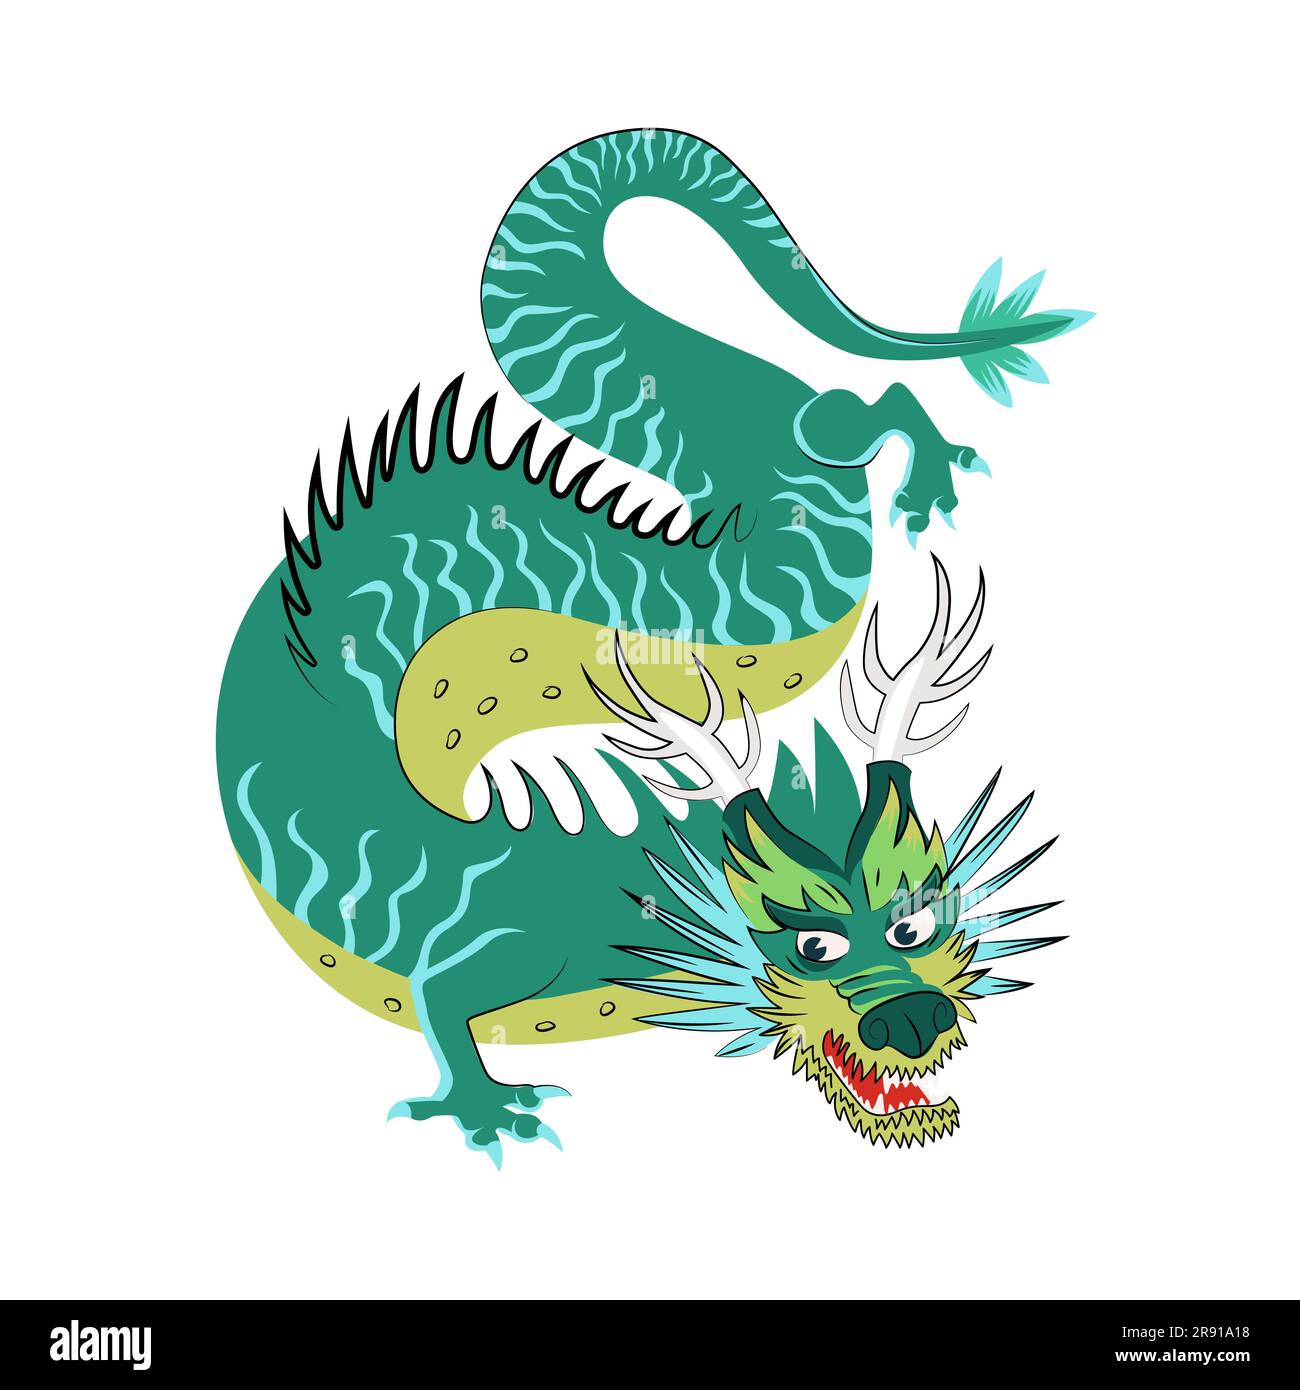 Traditional Chinese green dragon zodiac sign. Asian sacred symbol of goodness and power. Japanese ancient animal vector illustration isolated on white background Stock Vector